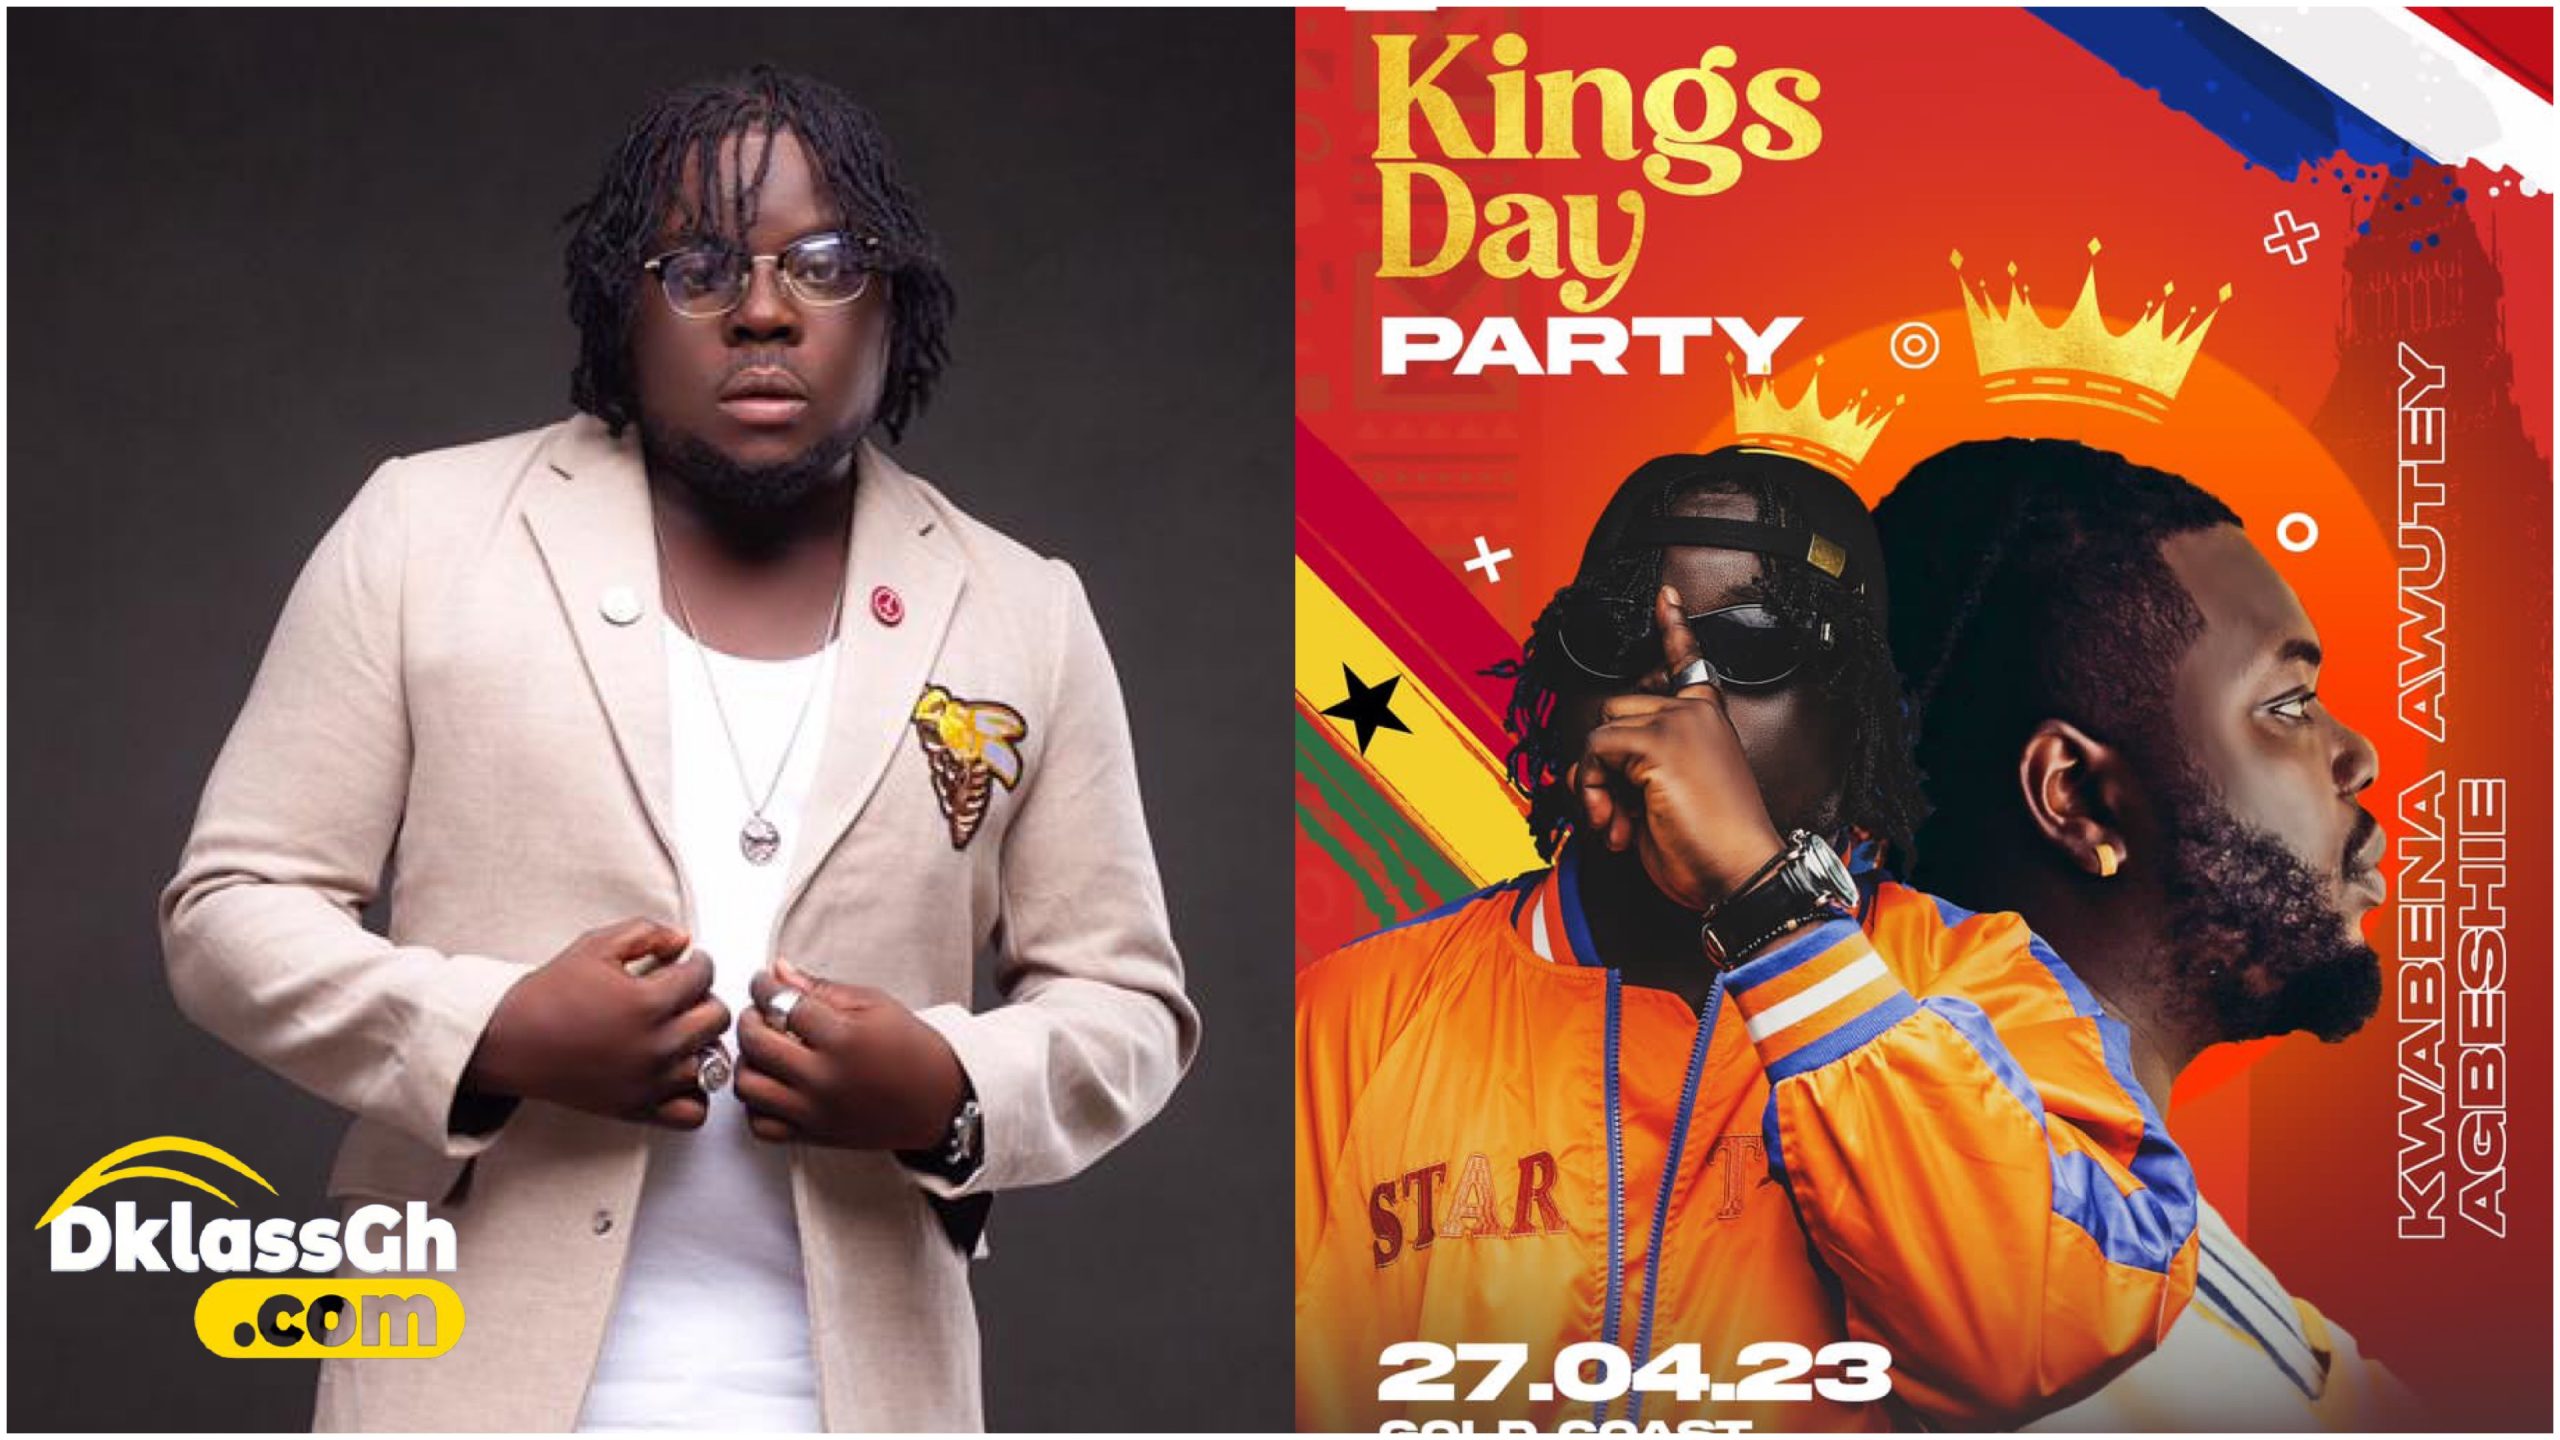 Agbeshie To Perform At King's Day Party In Amsterdam On April 27